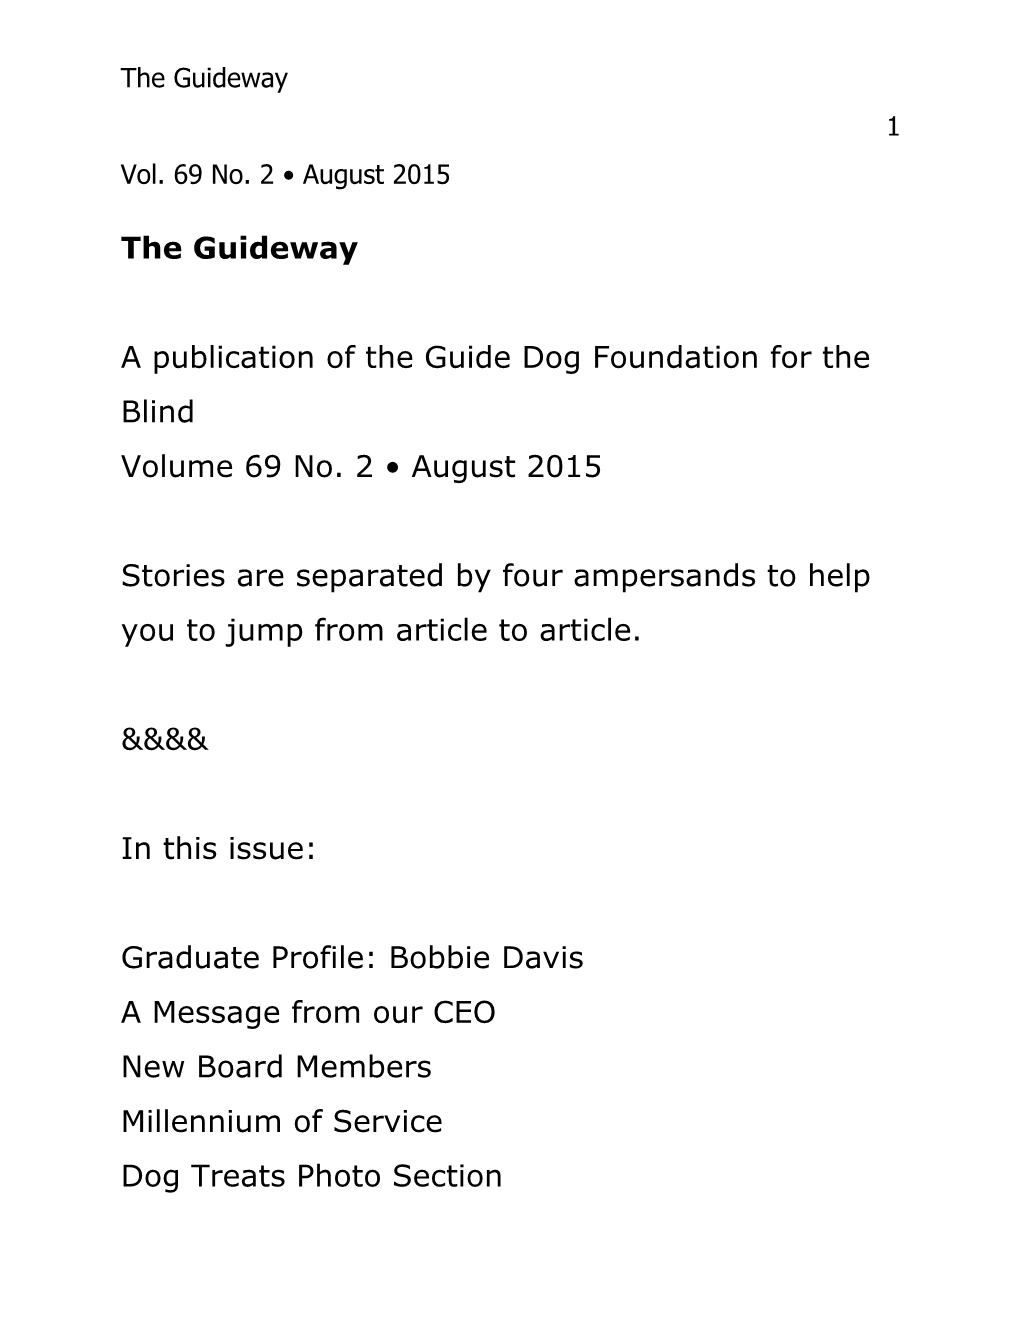 A Publication of the Guide Dog Foundation for the Blind